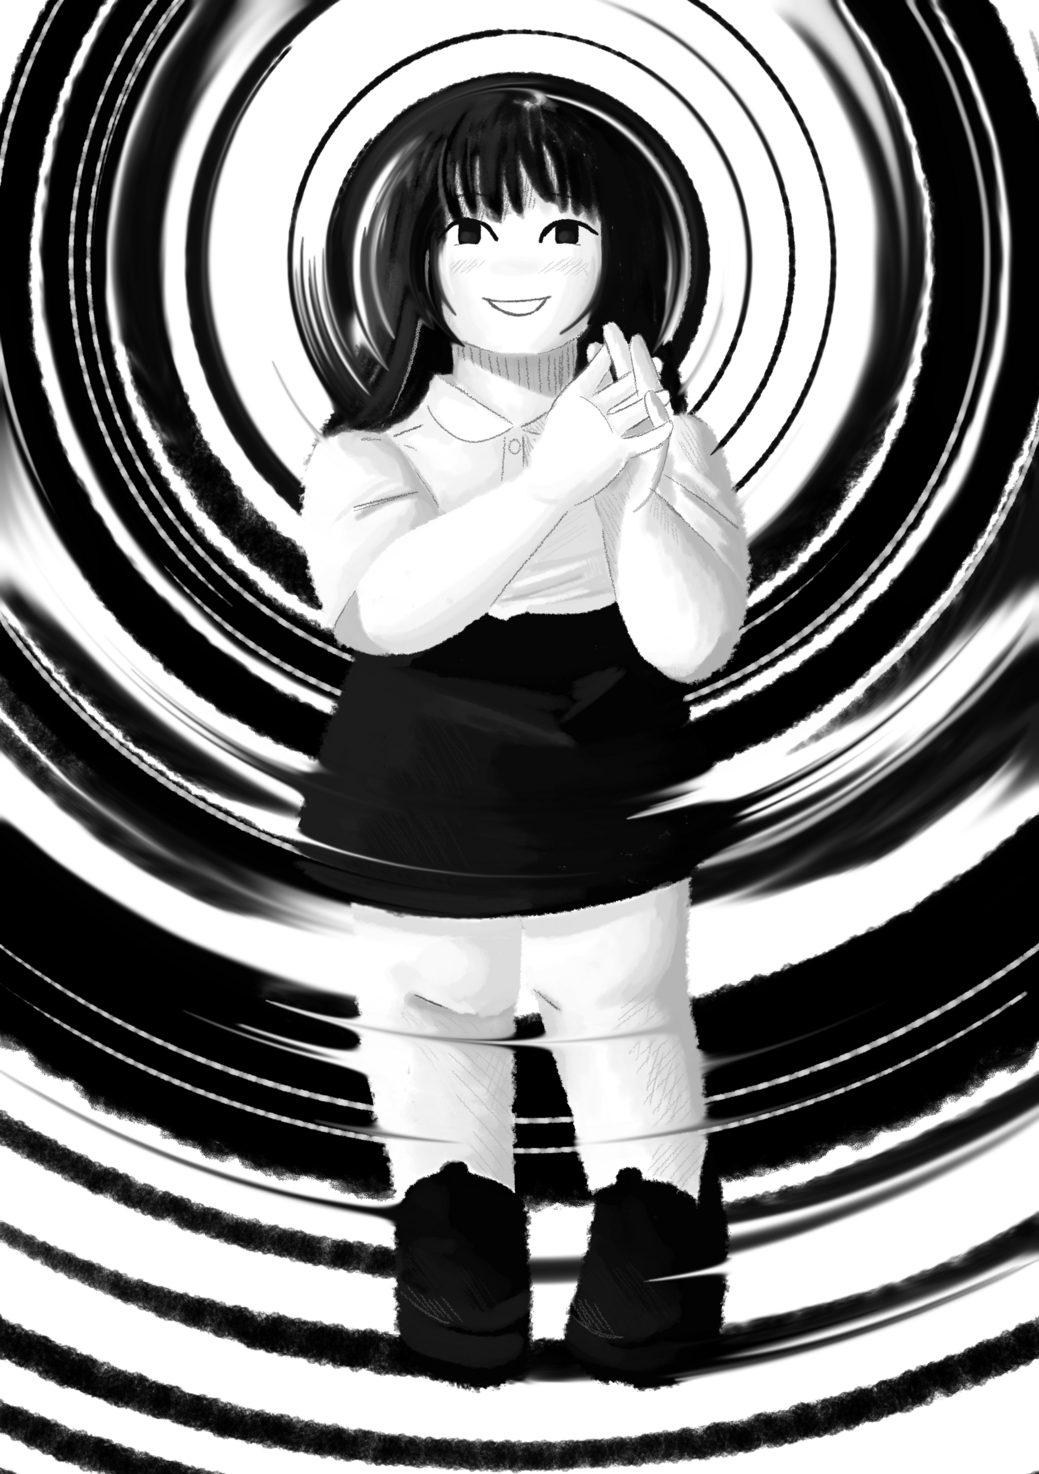 an illustration of Monoe standing with her hands clasped, the background is a black and white spiral blending into her